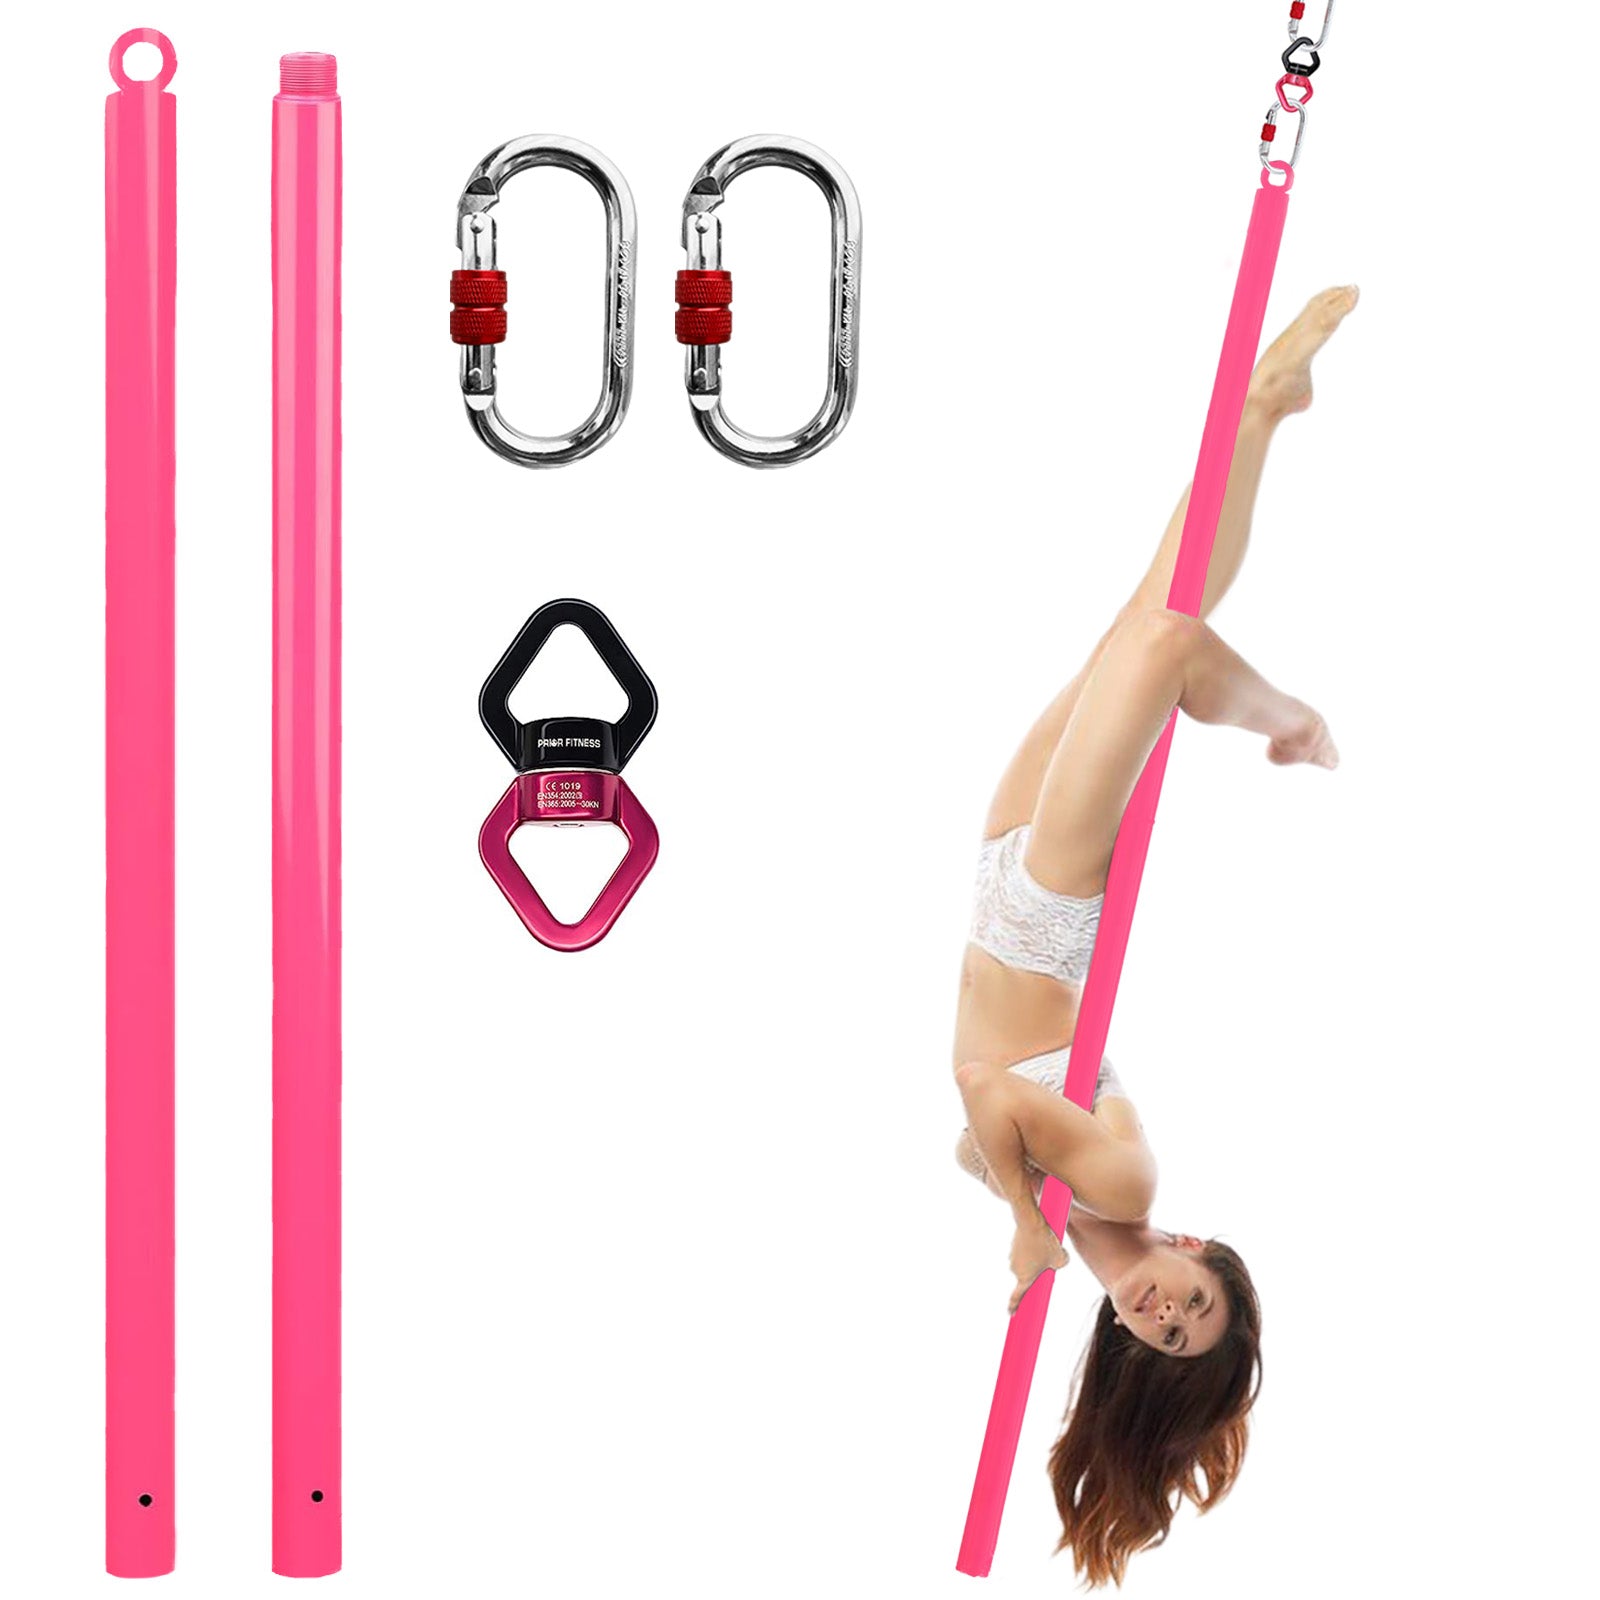 PRIOR FITNESS 3M Flying Dance Pole Kit with Rigging Hardware - priorfitness